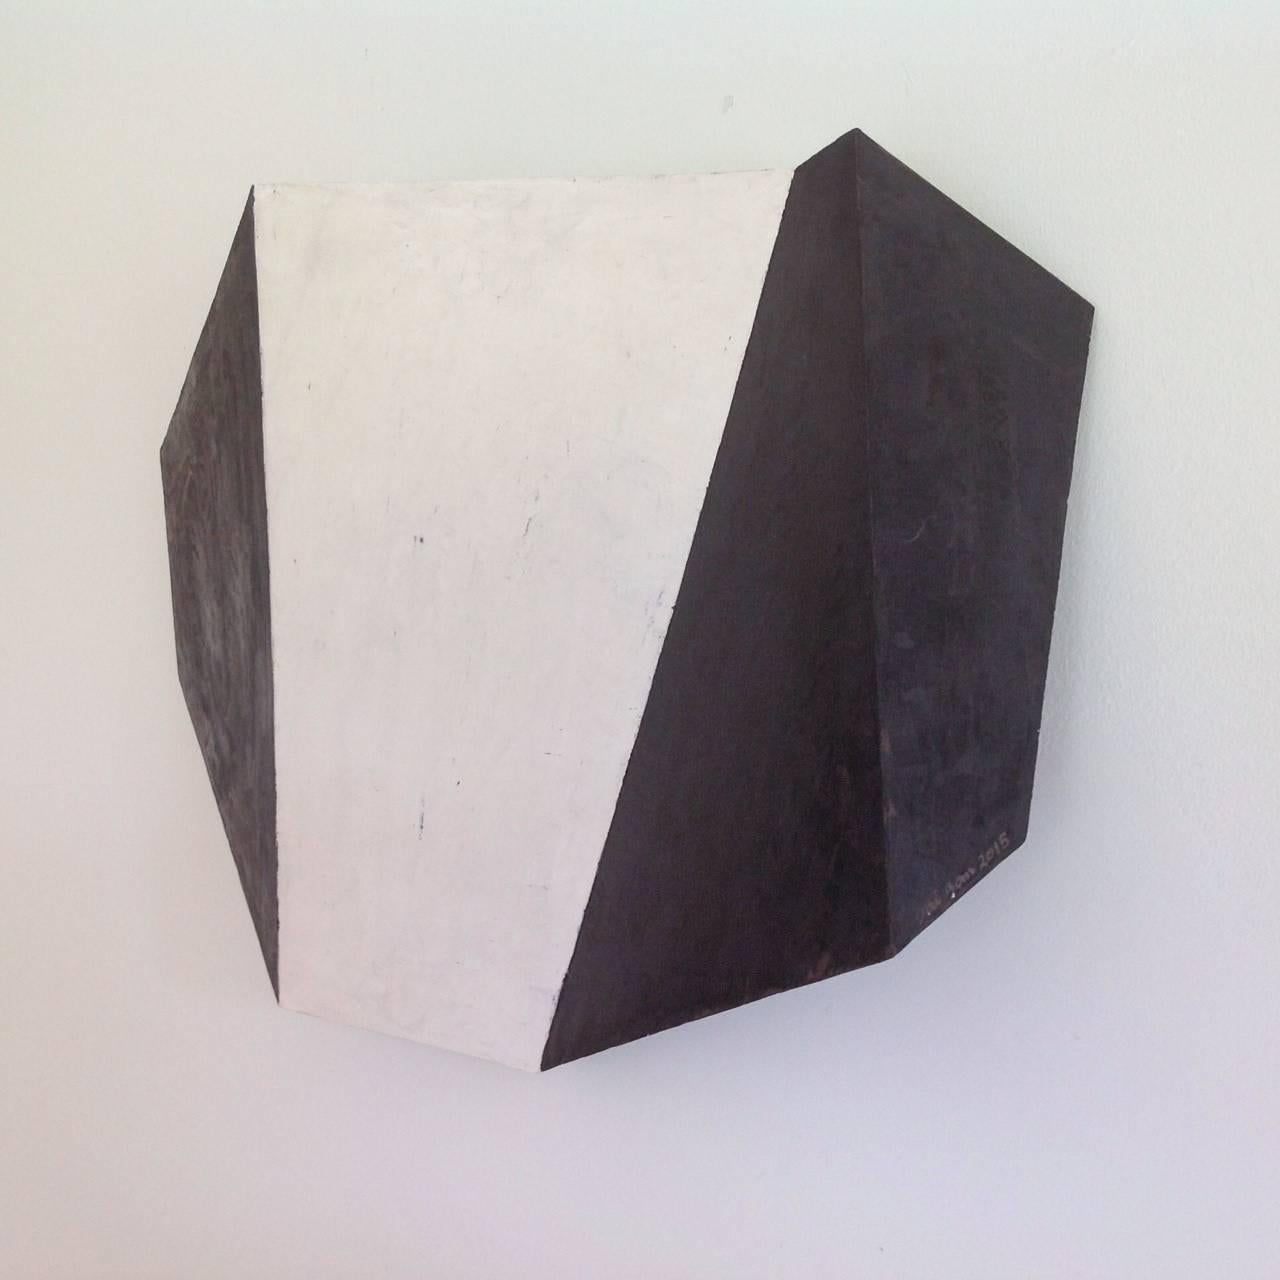 Black and White (Minimalist Abstract 3D Wall Sculpture) - Beige Abstract Sculpture by Dai Ban